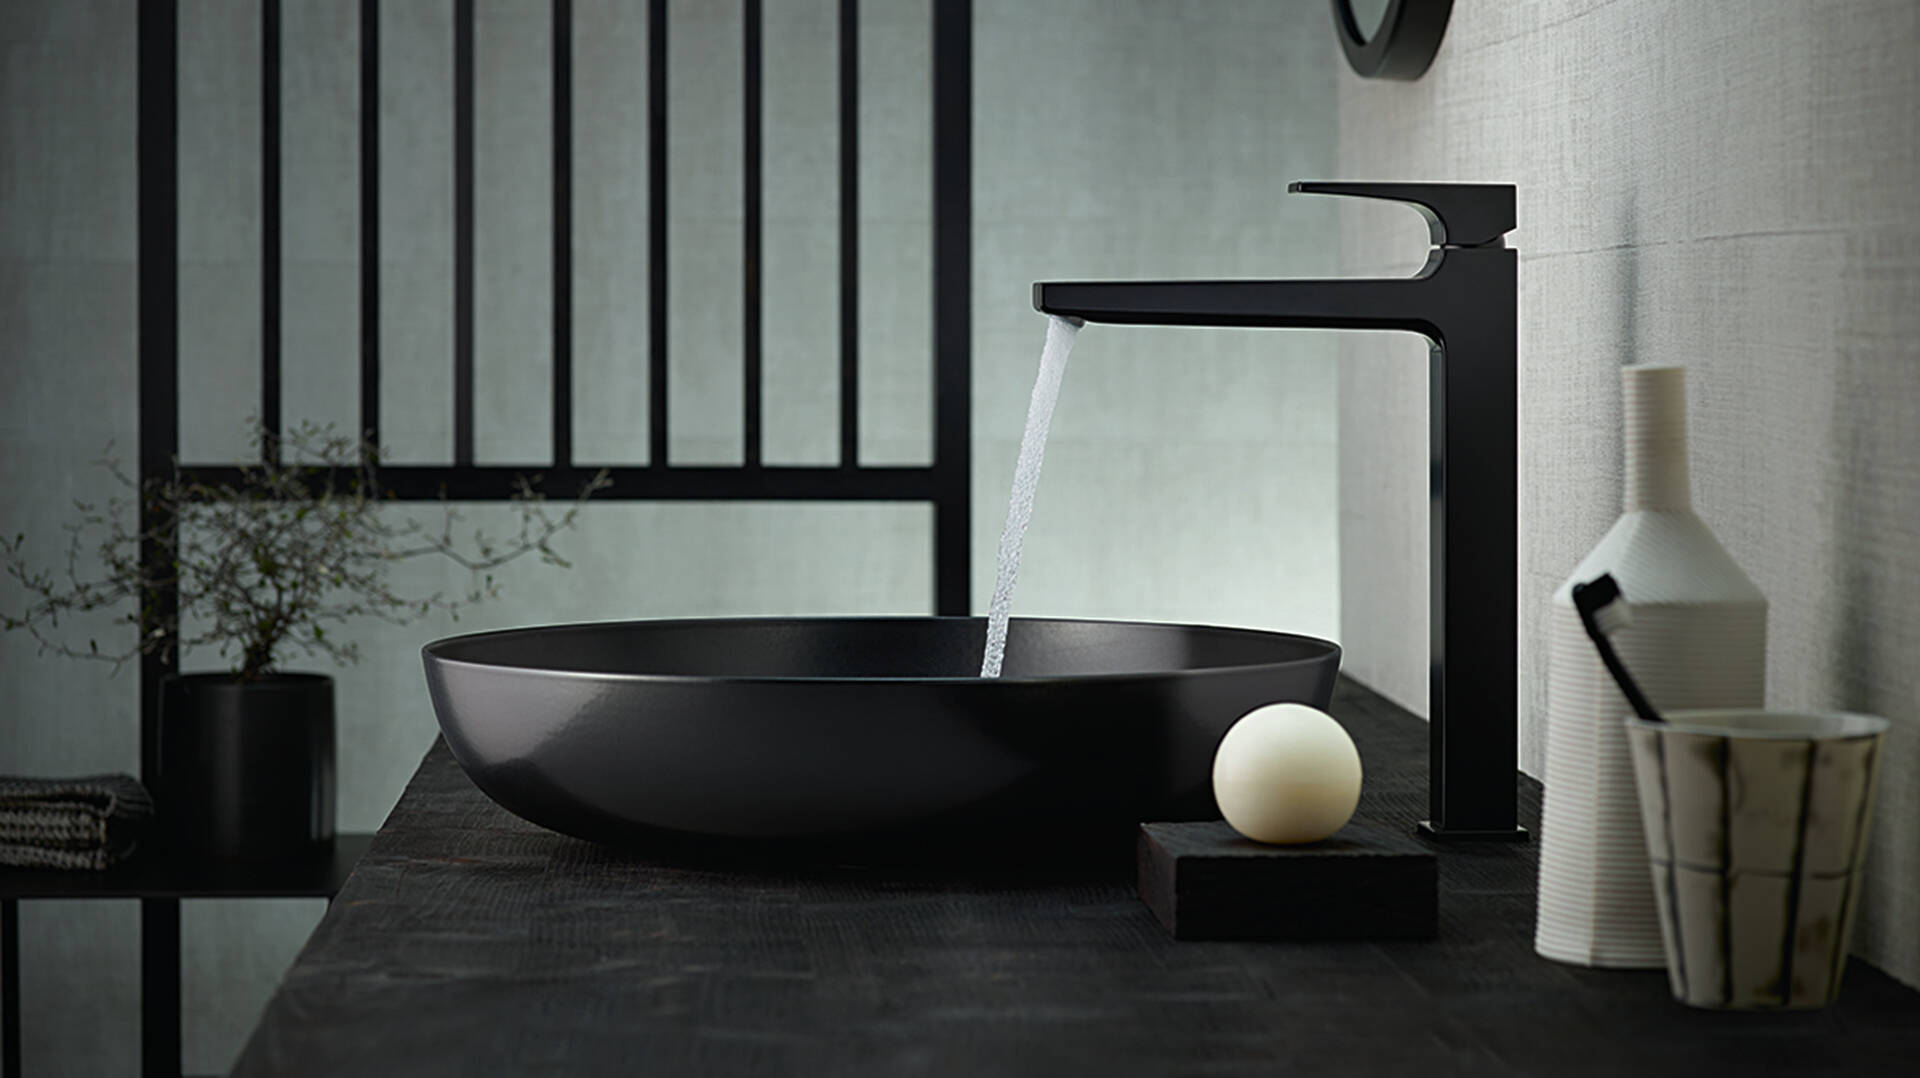 【Today's News】 Hansgrohe: 2020 Sales Of 8.4 Billion Yuan, China Market Growth Of 7% Against The Trend - Blog - 1